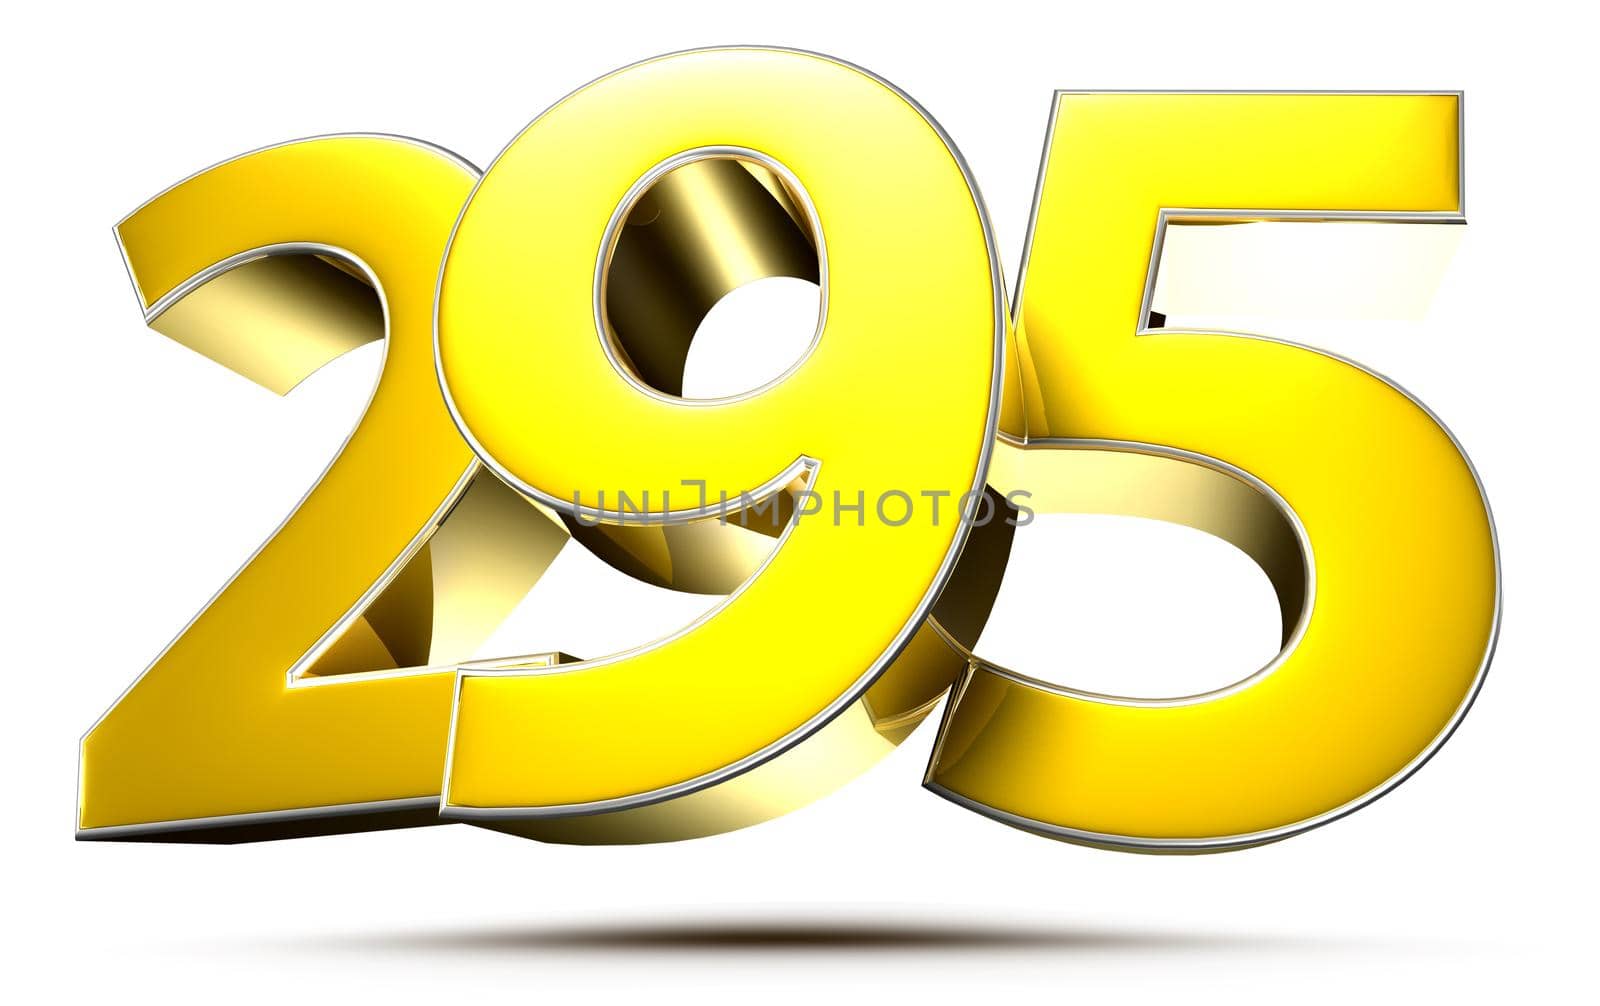 295 gold 3D illustration on white background with clipping path.